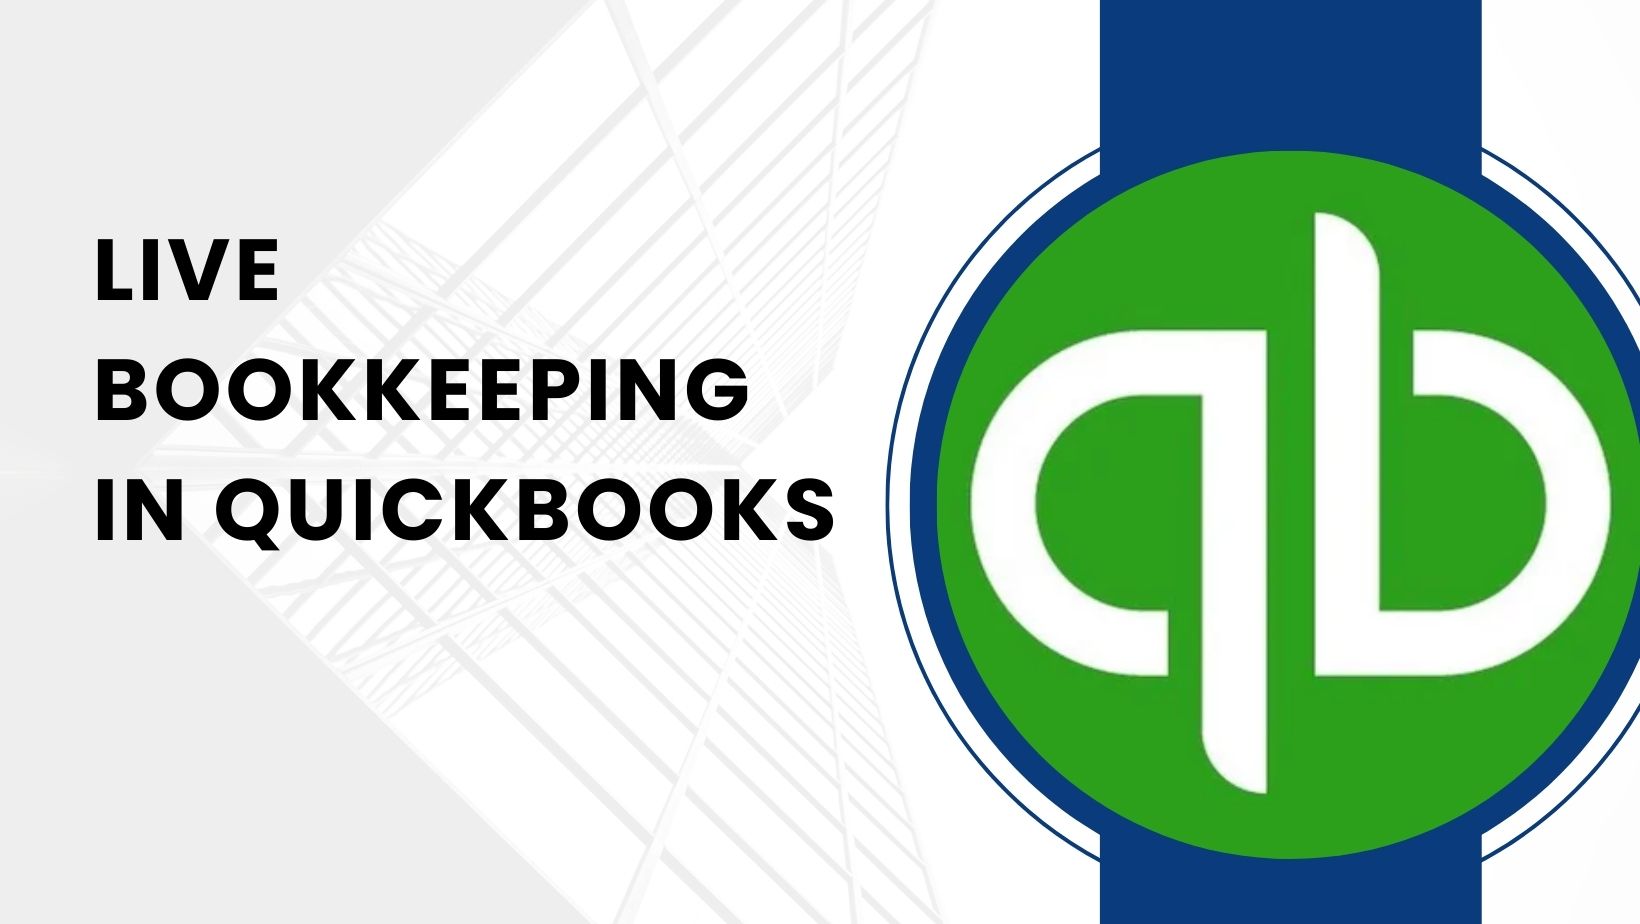 Top 14 Questions For Live Bookkeeping In Quickbooks